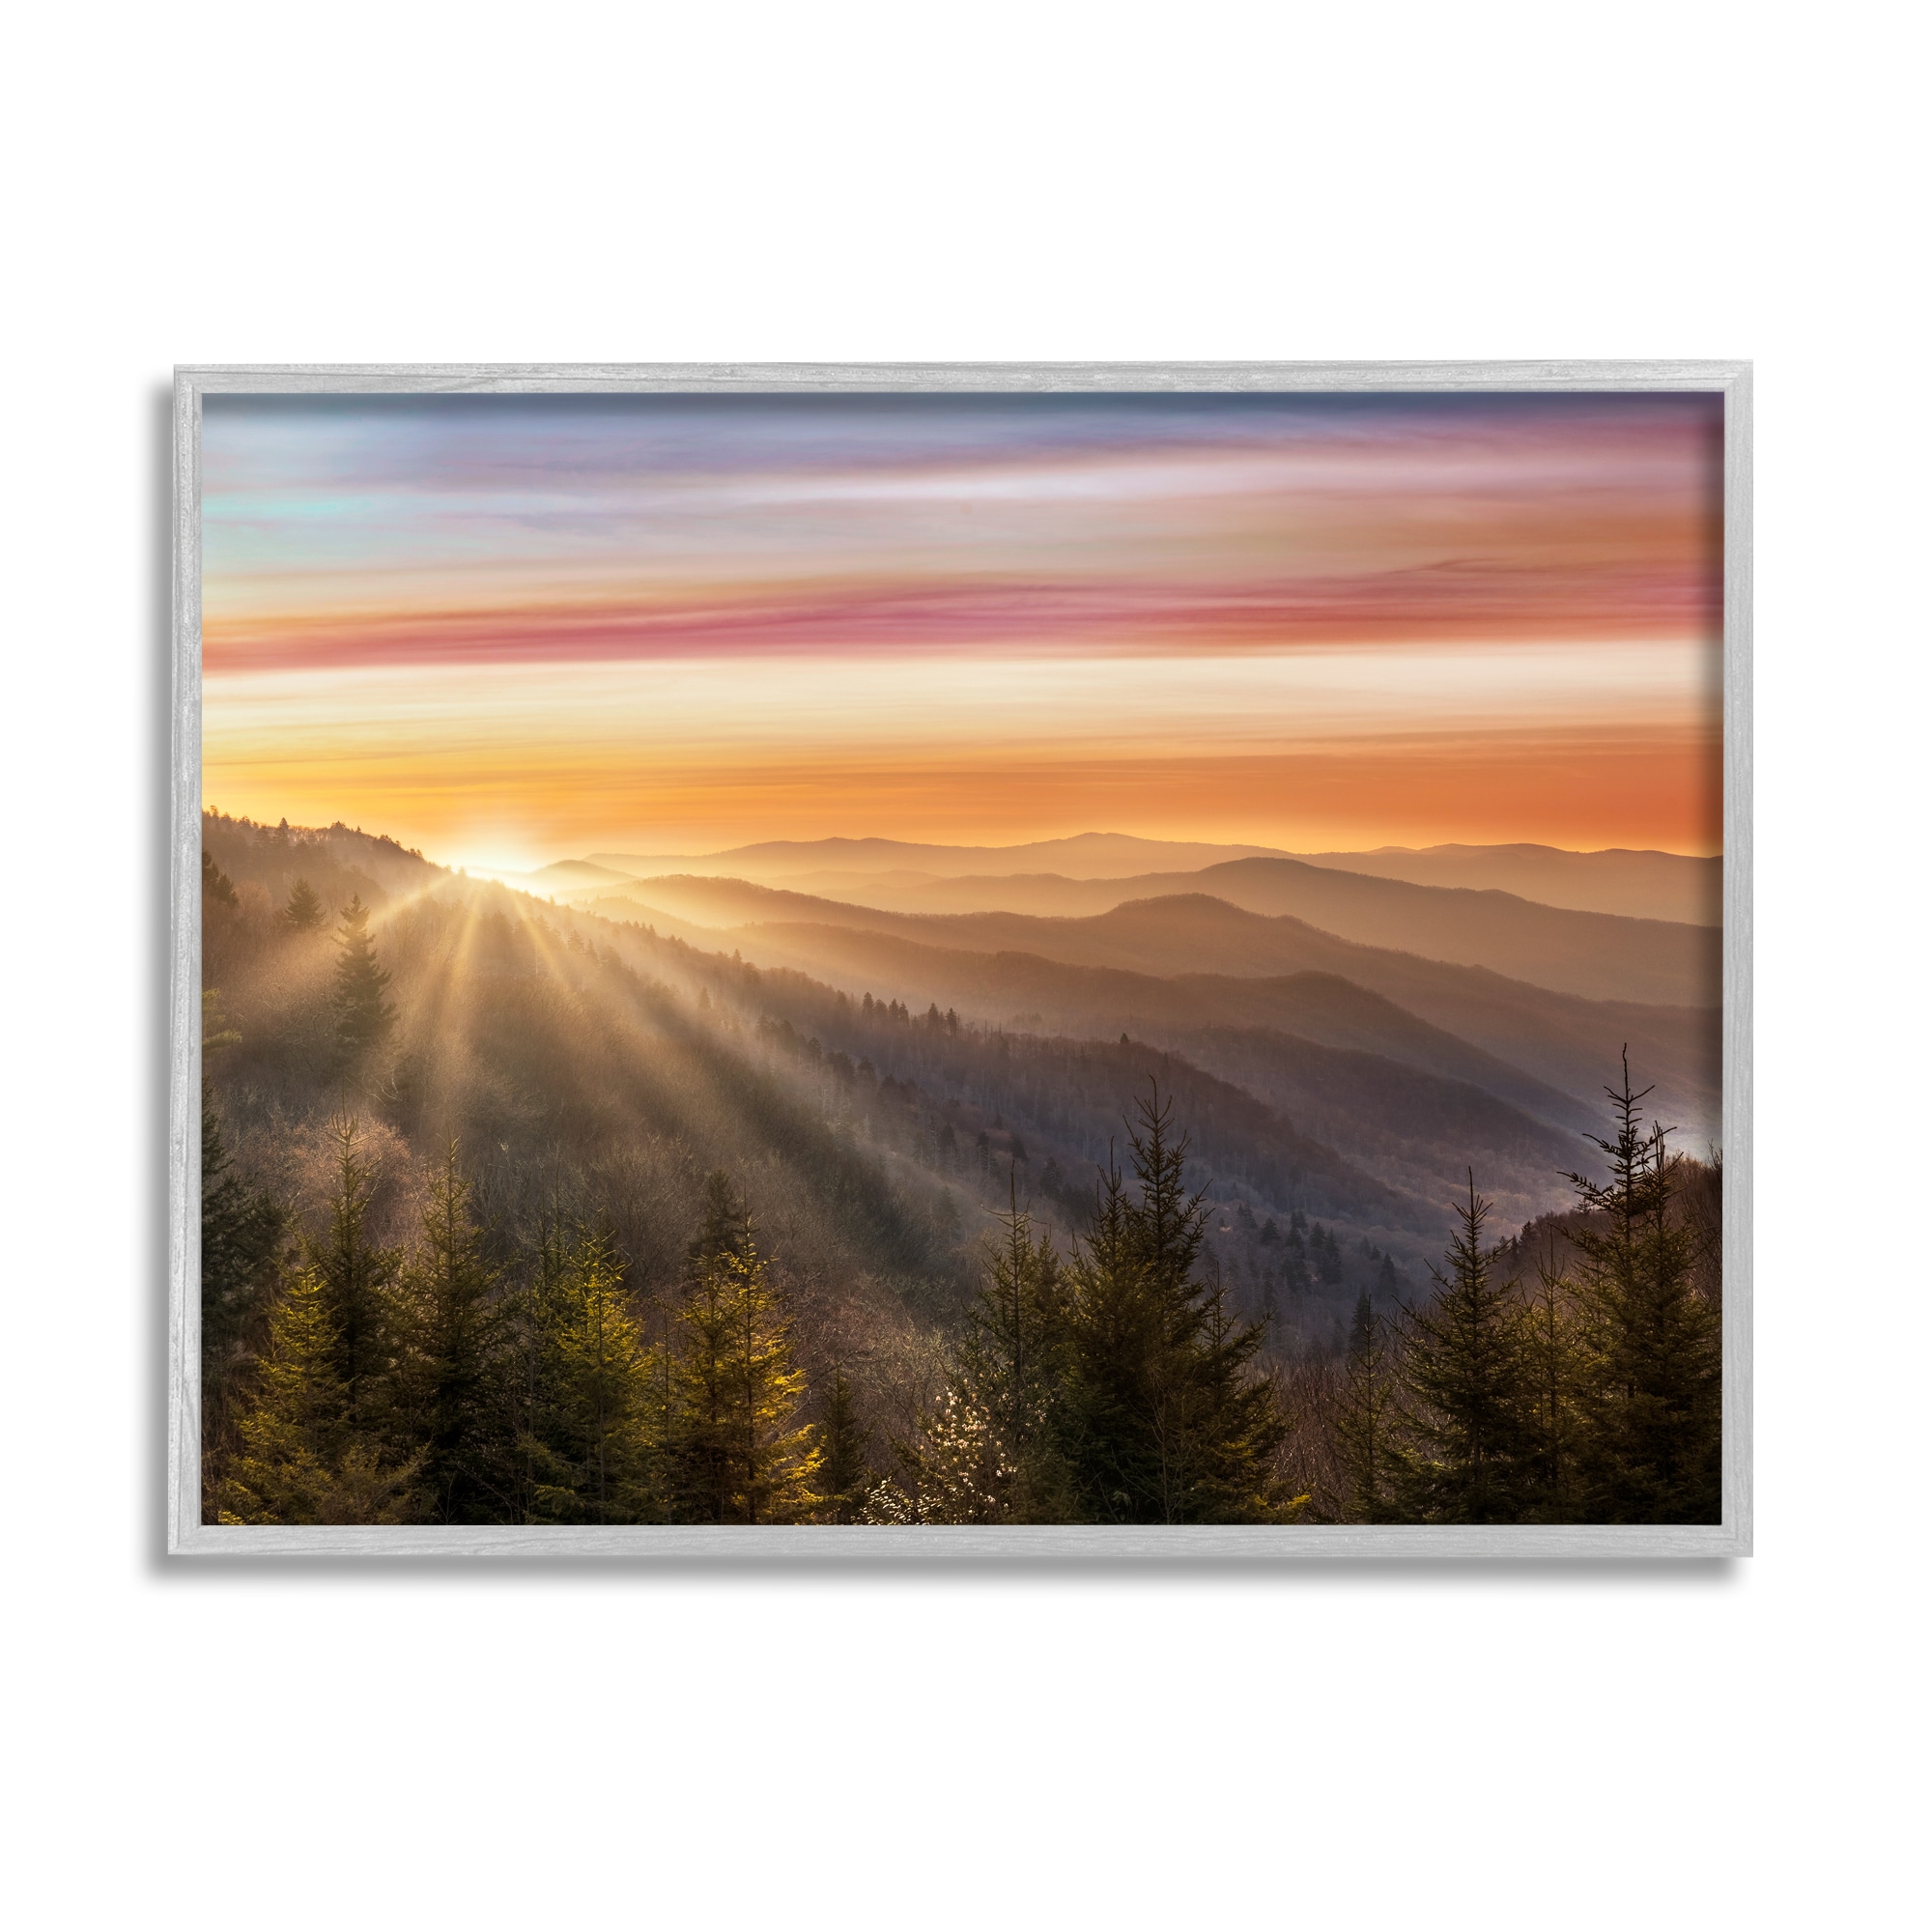 Stupell Industries Sunrise Through Mountain Forest Skyline Warm Sky Danita Delimont Gray Wood Framed 30-in H x 24-in W Landscape Print on Canvas -  AI-443-GFF-24X30